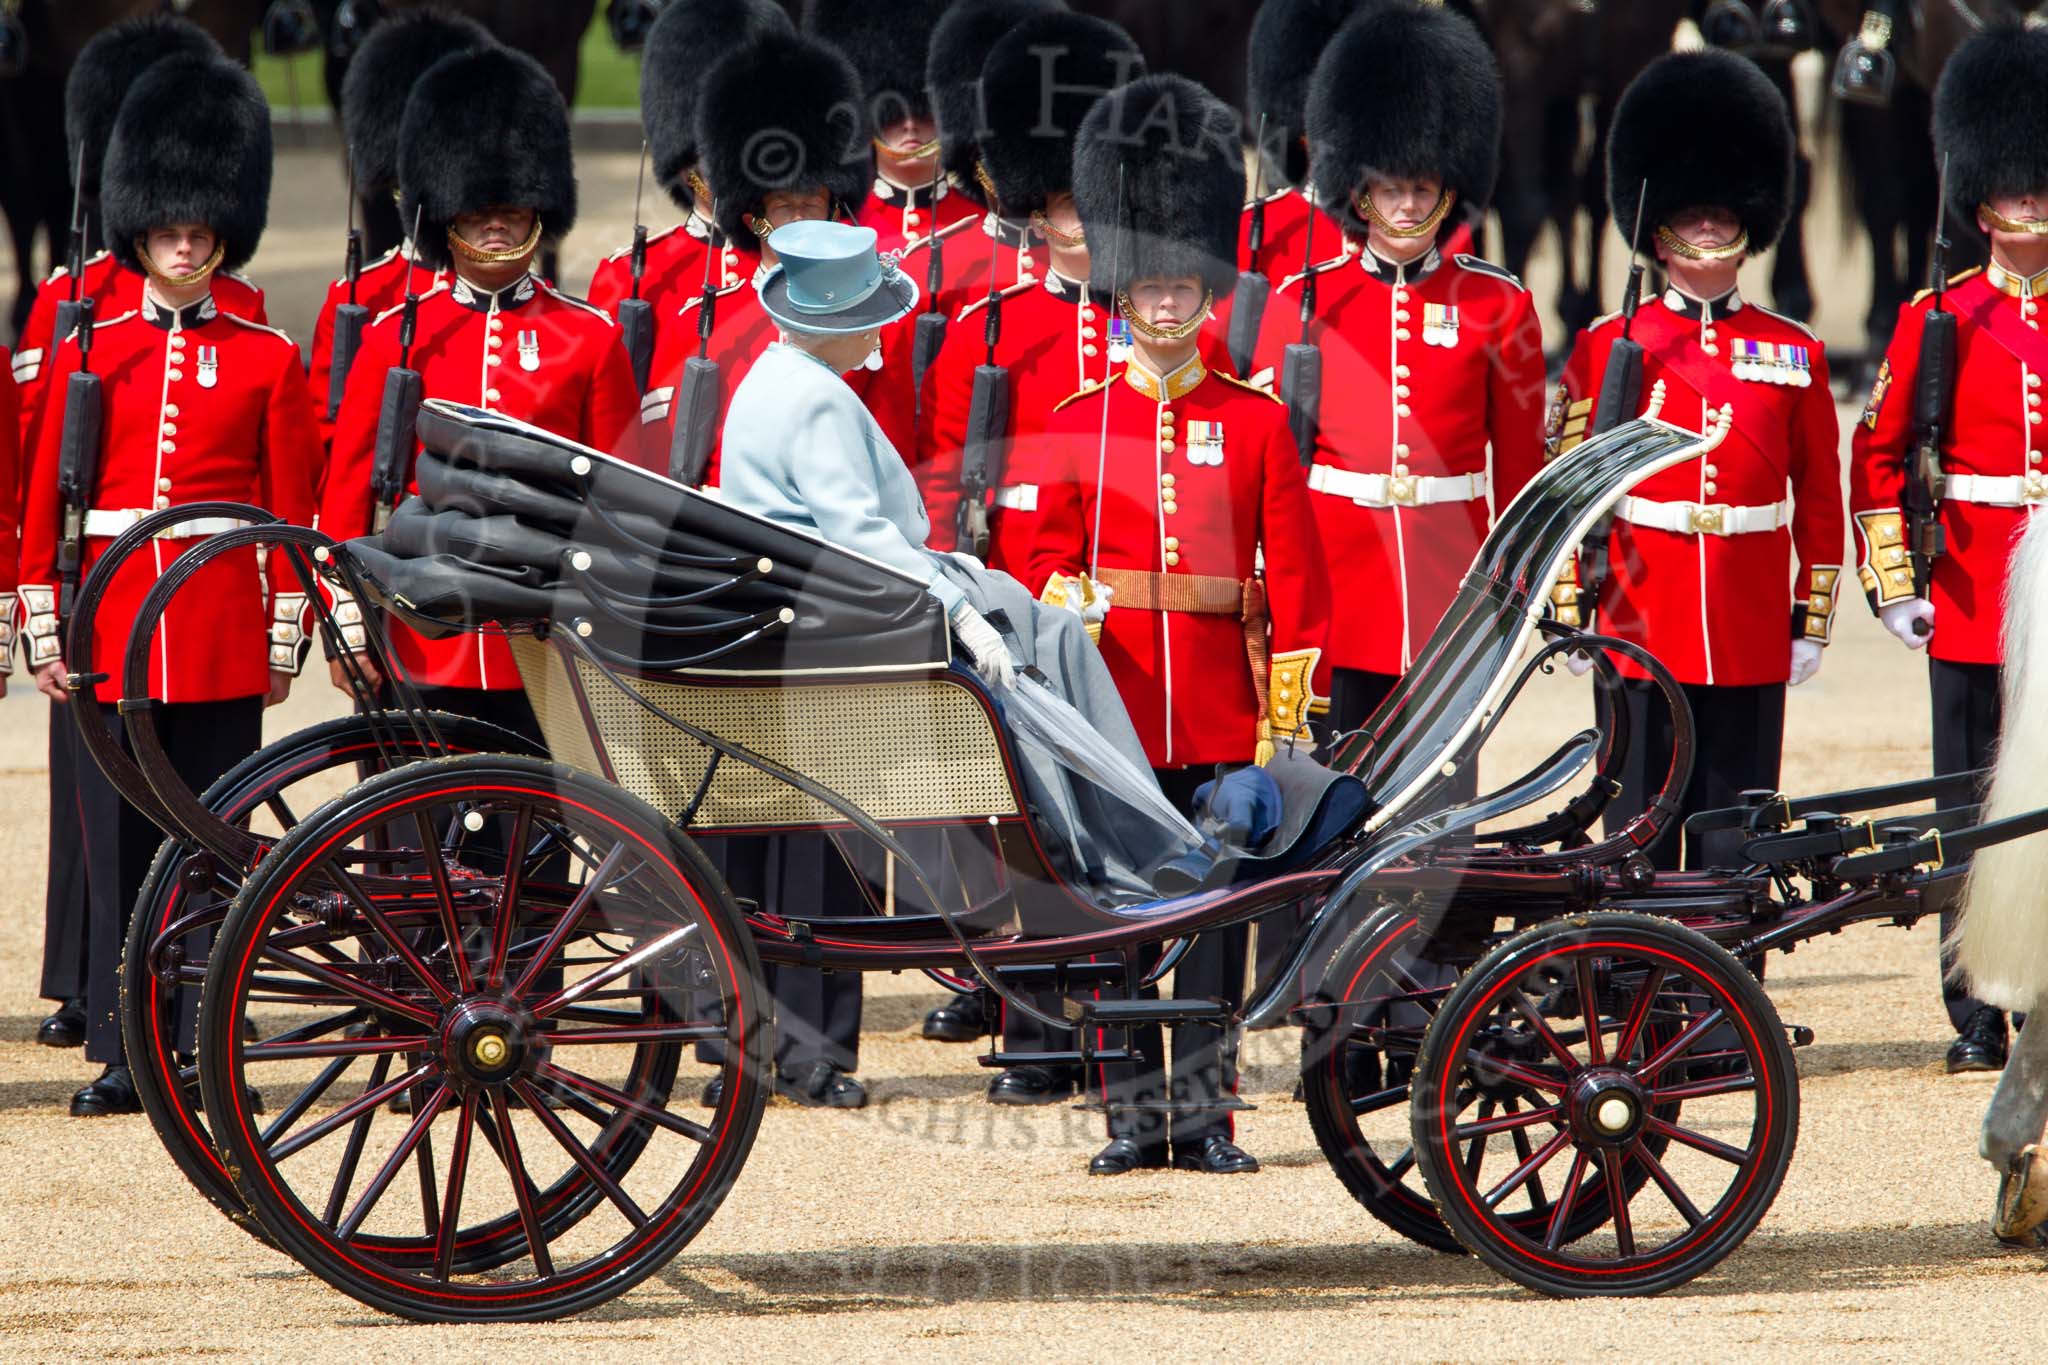 Trooping the Colour 2011: HM The Queen, in the ivory mounted phaeton, during the Inspection of the Line, here No. 2 Guard, B Company Scots Guards..
Horse Guards Parade, Westminster,
London SW1,
Greater London,
United Kingdom,
on 11 June 2011 at 11:03, image #155